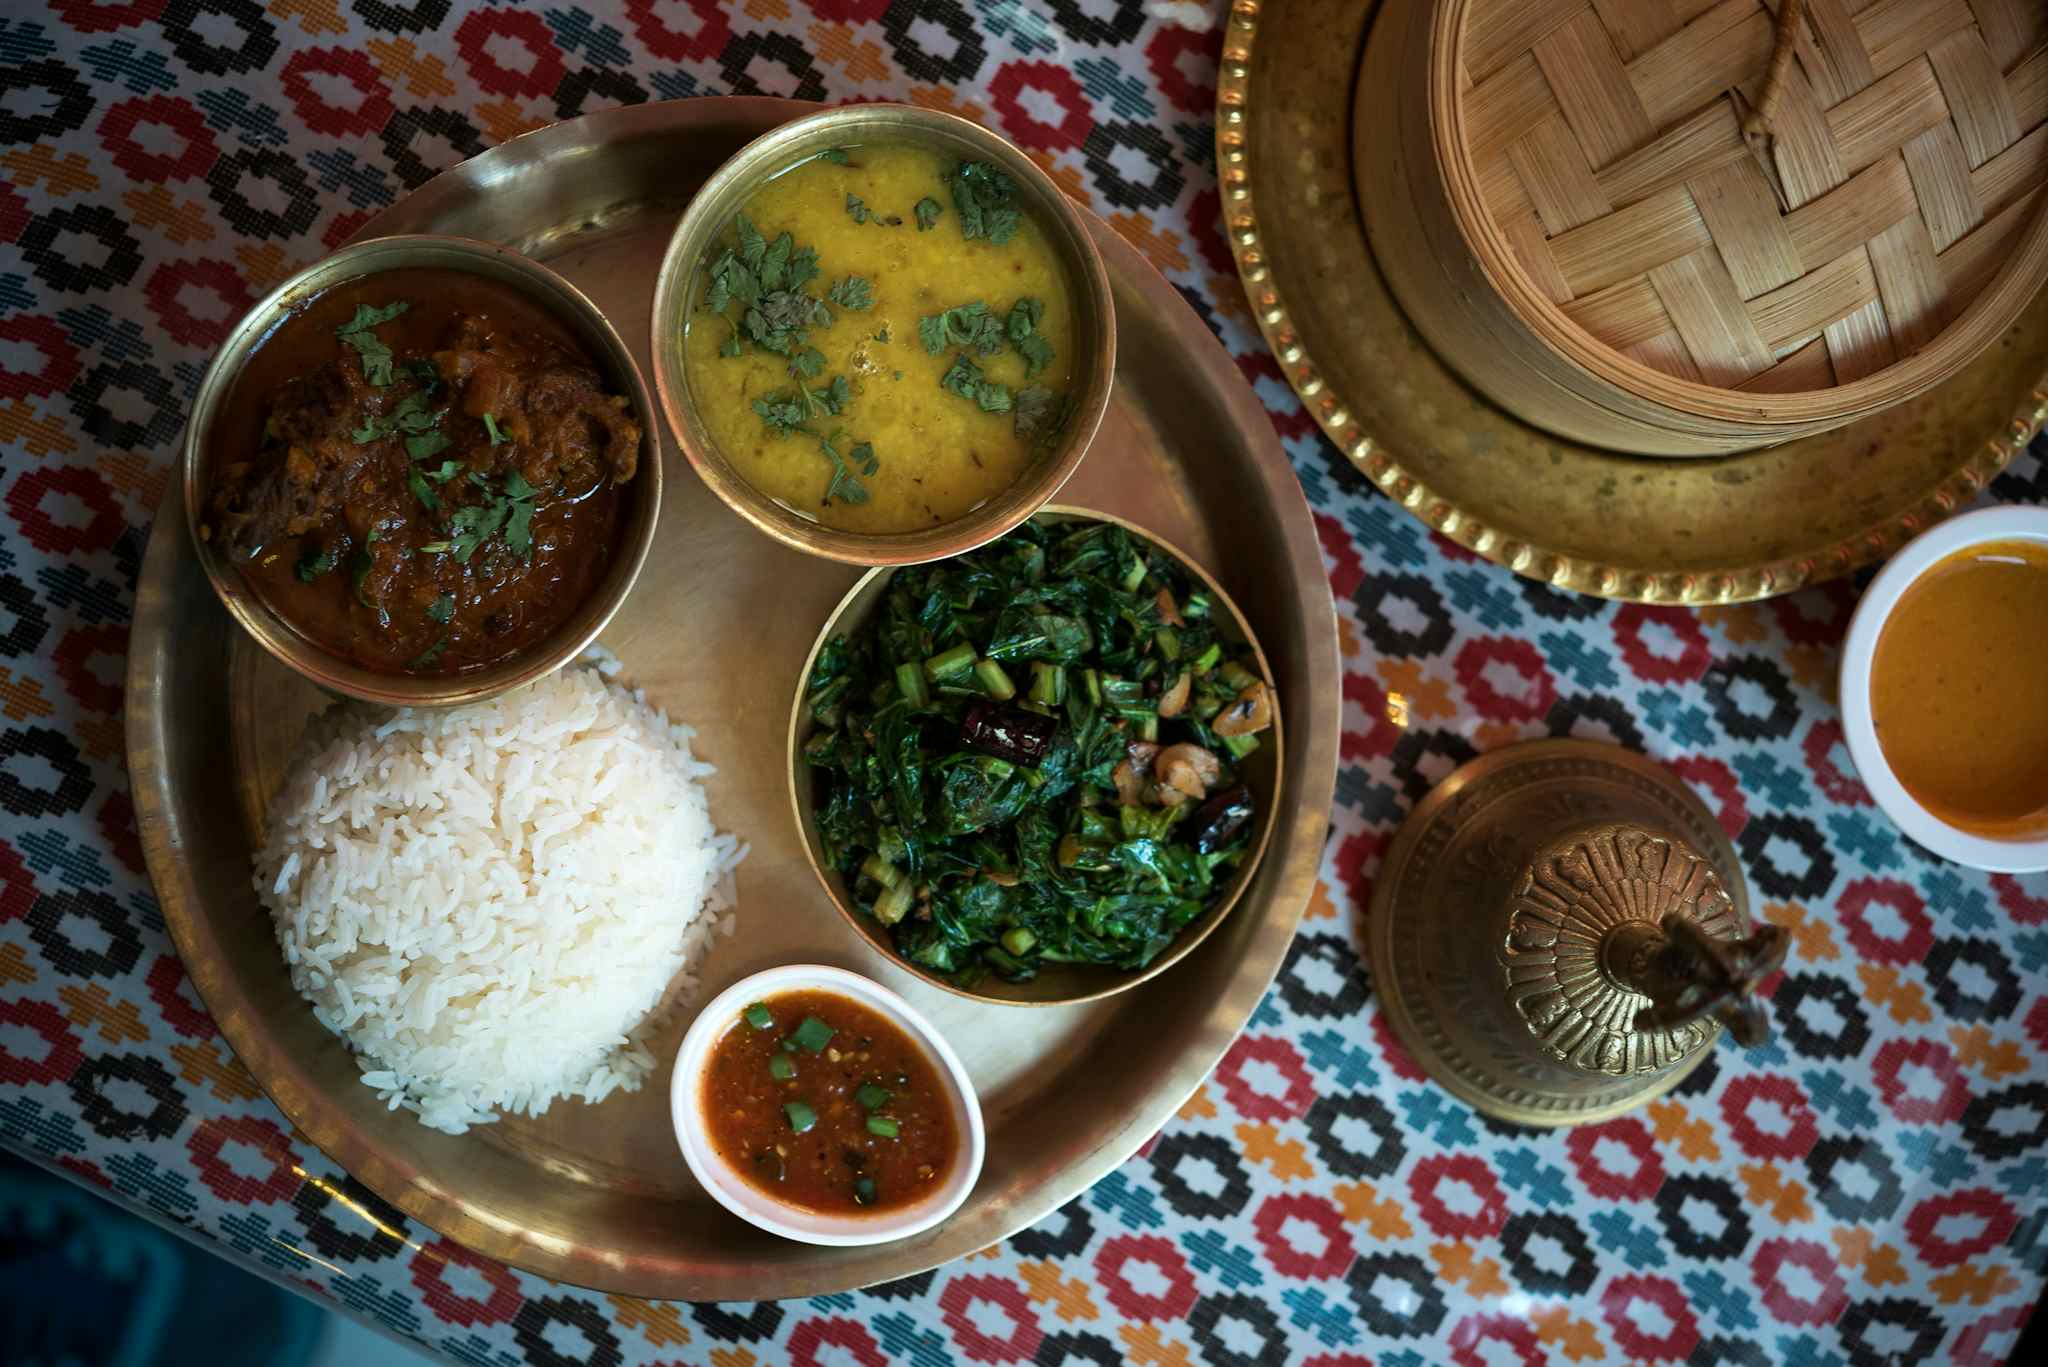 Traditional Nepalese meal of dhal bhat.